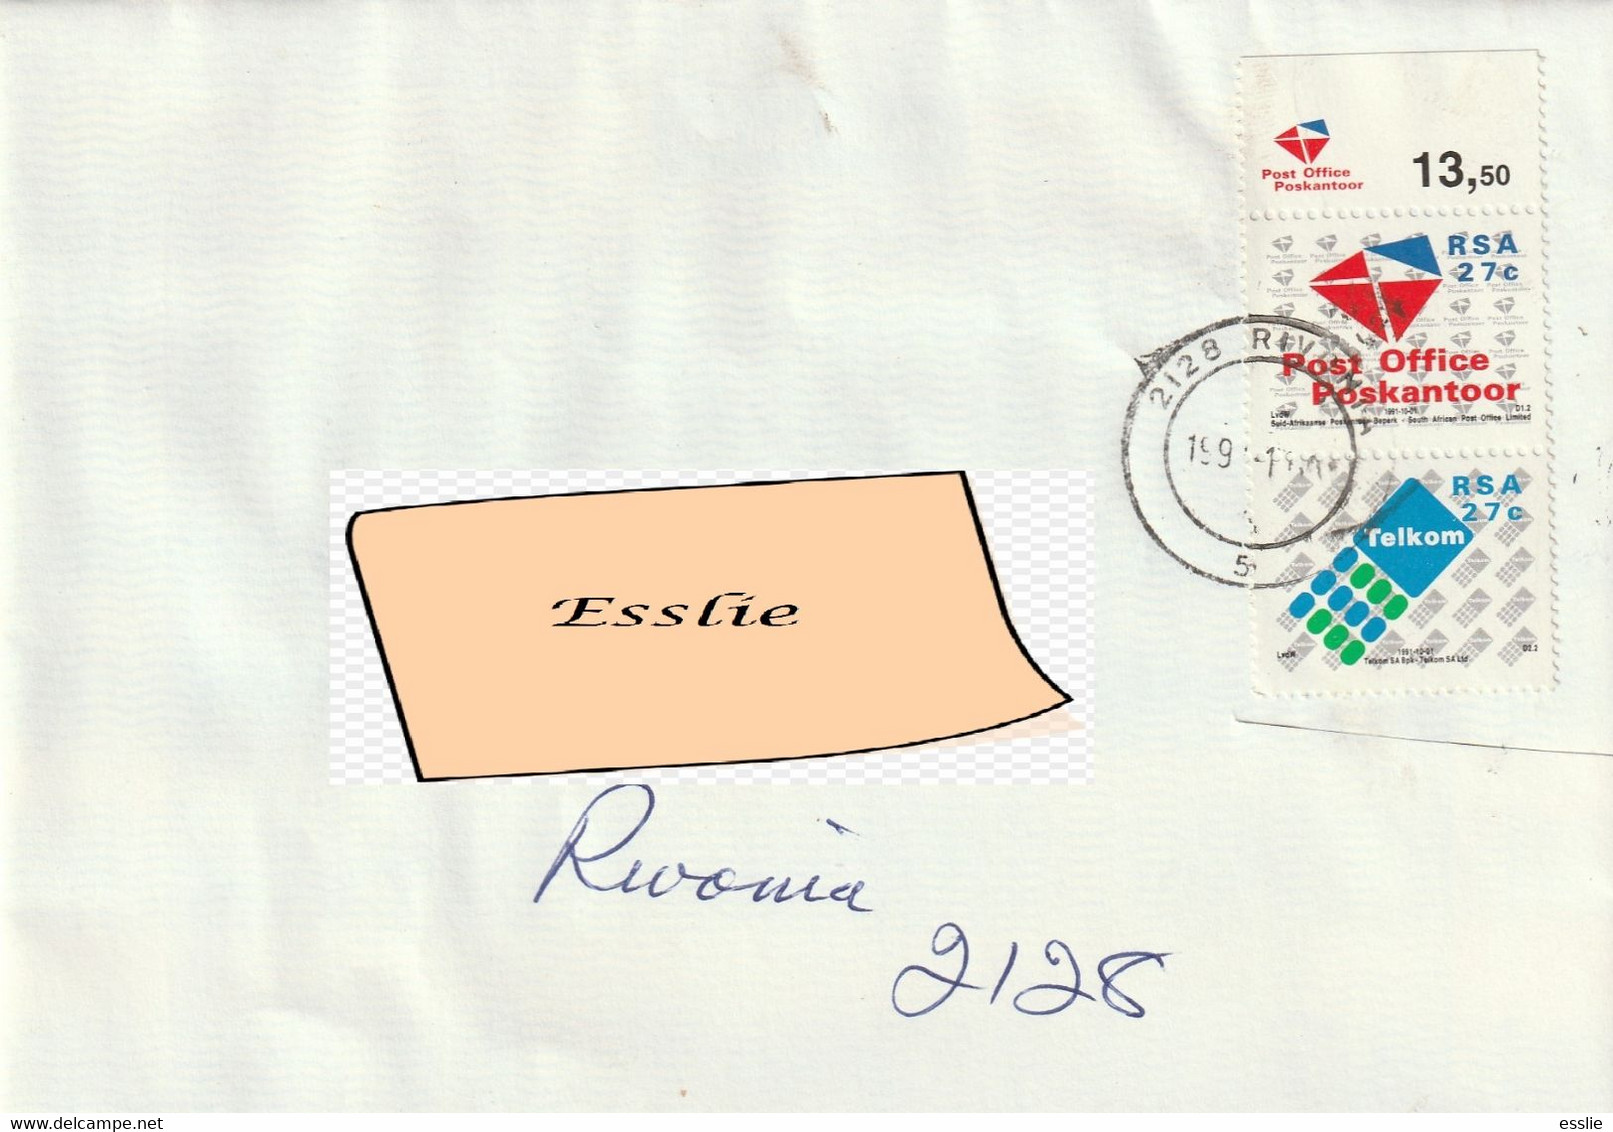 South Africa RSA - 1991 - Creation Of Post Office And Telkom Limited Cover - Lettres & Documents